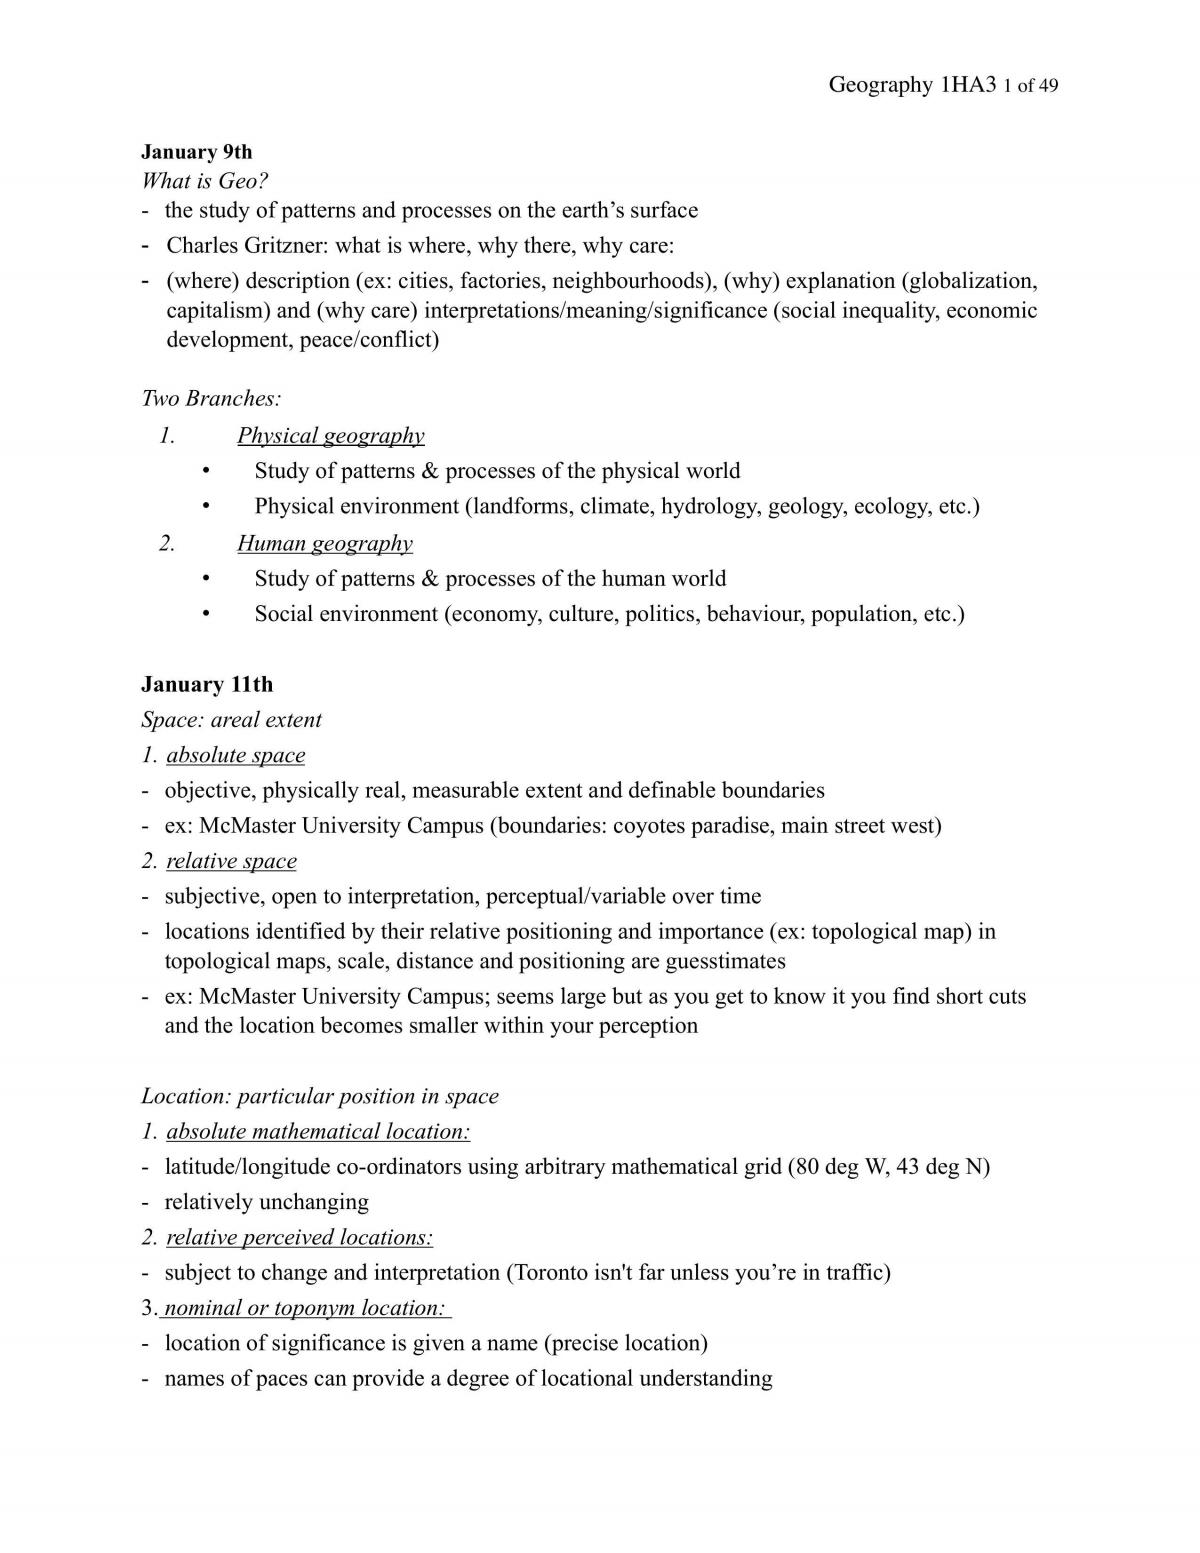 Society, Culture and Environment Entire Course Notes - Page 1